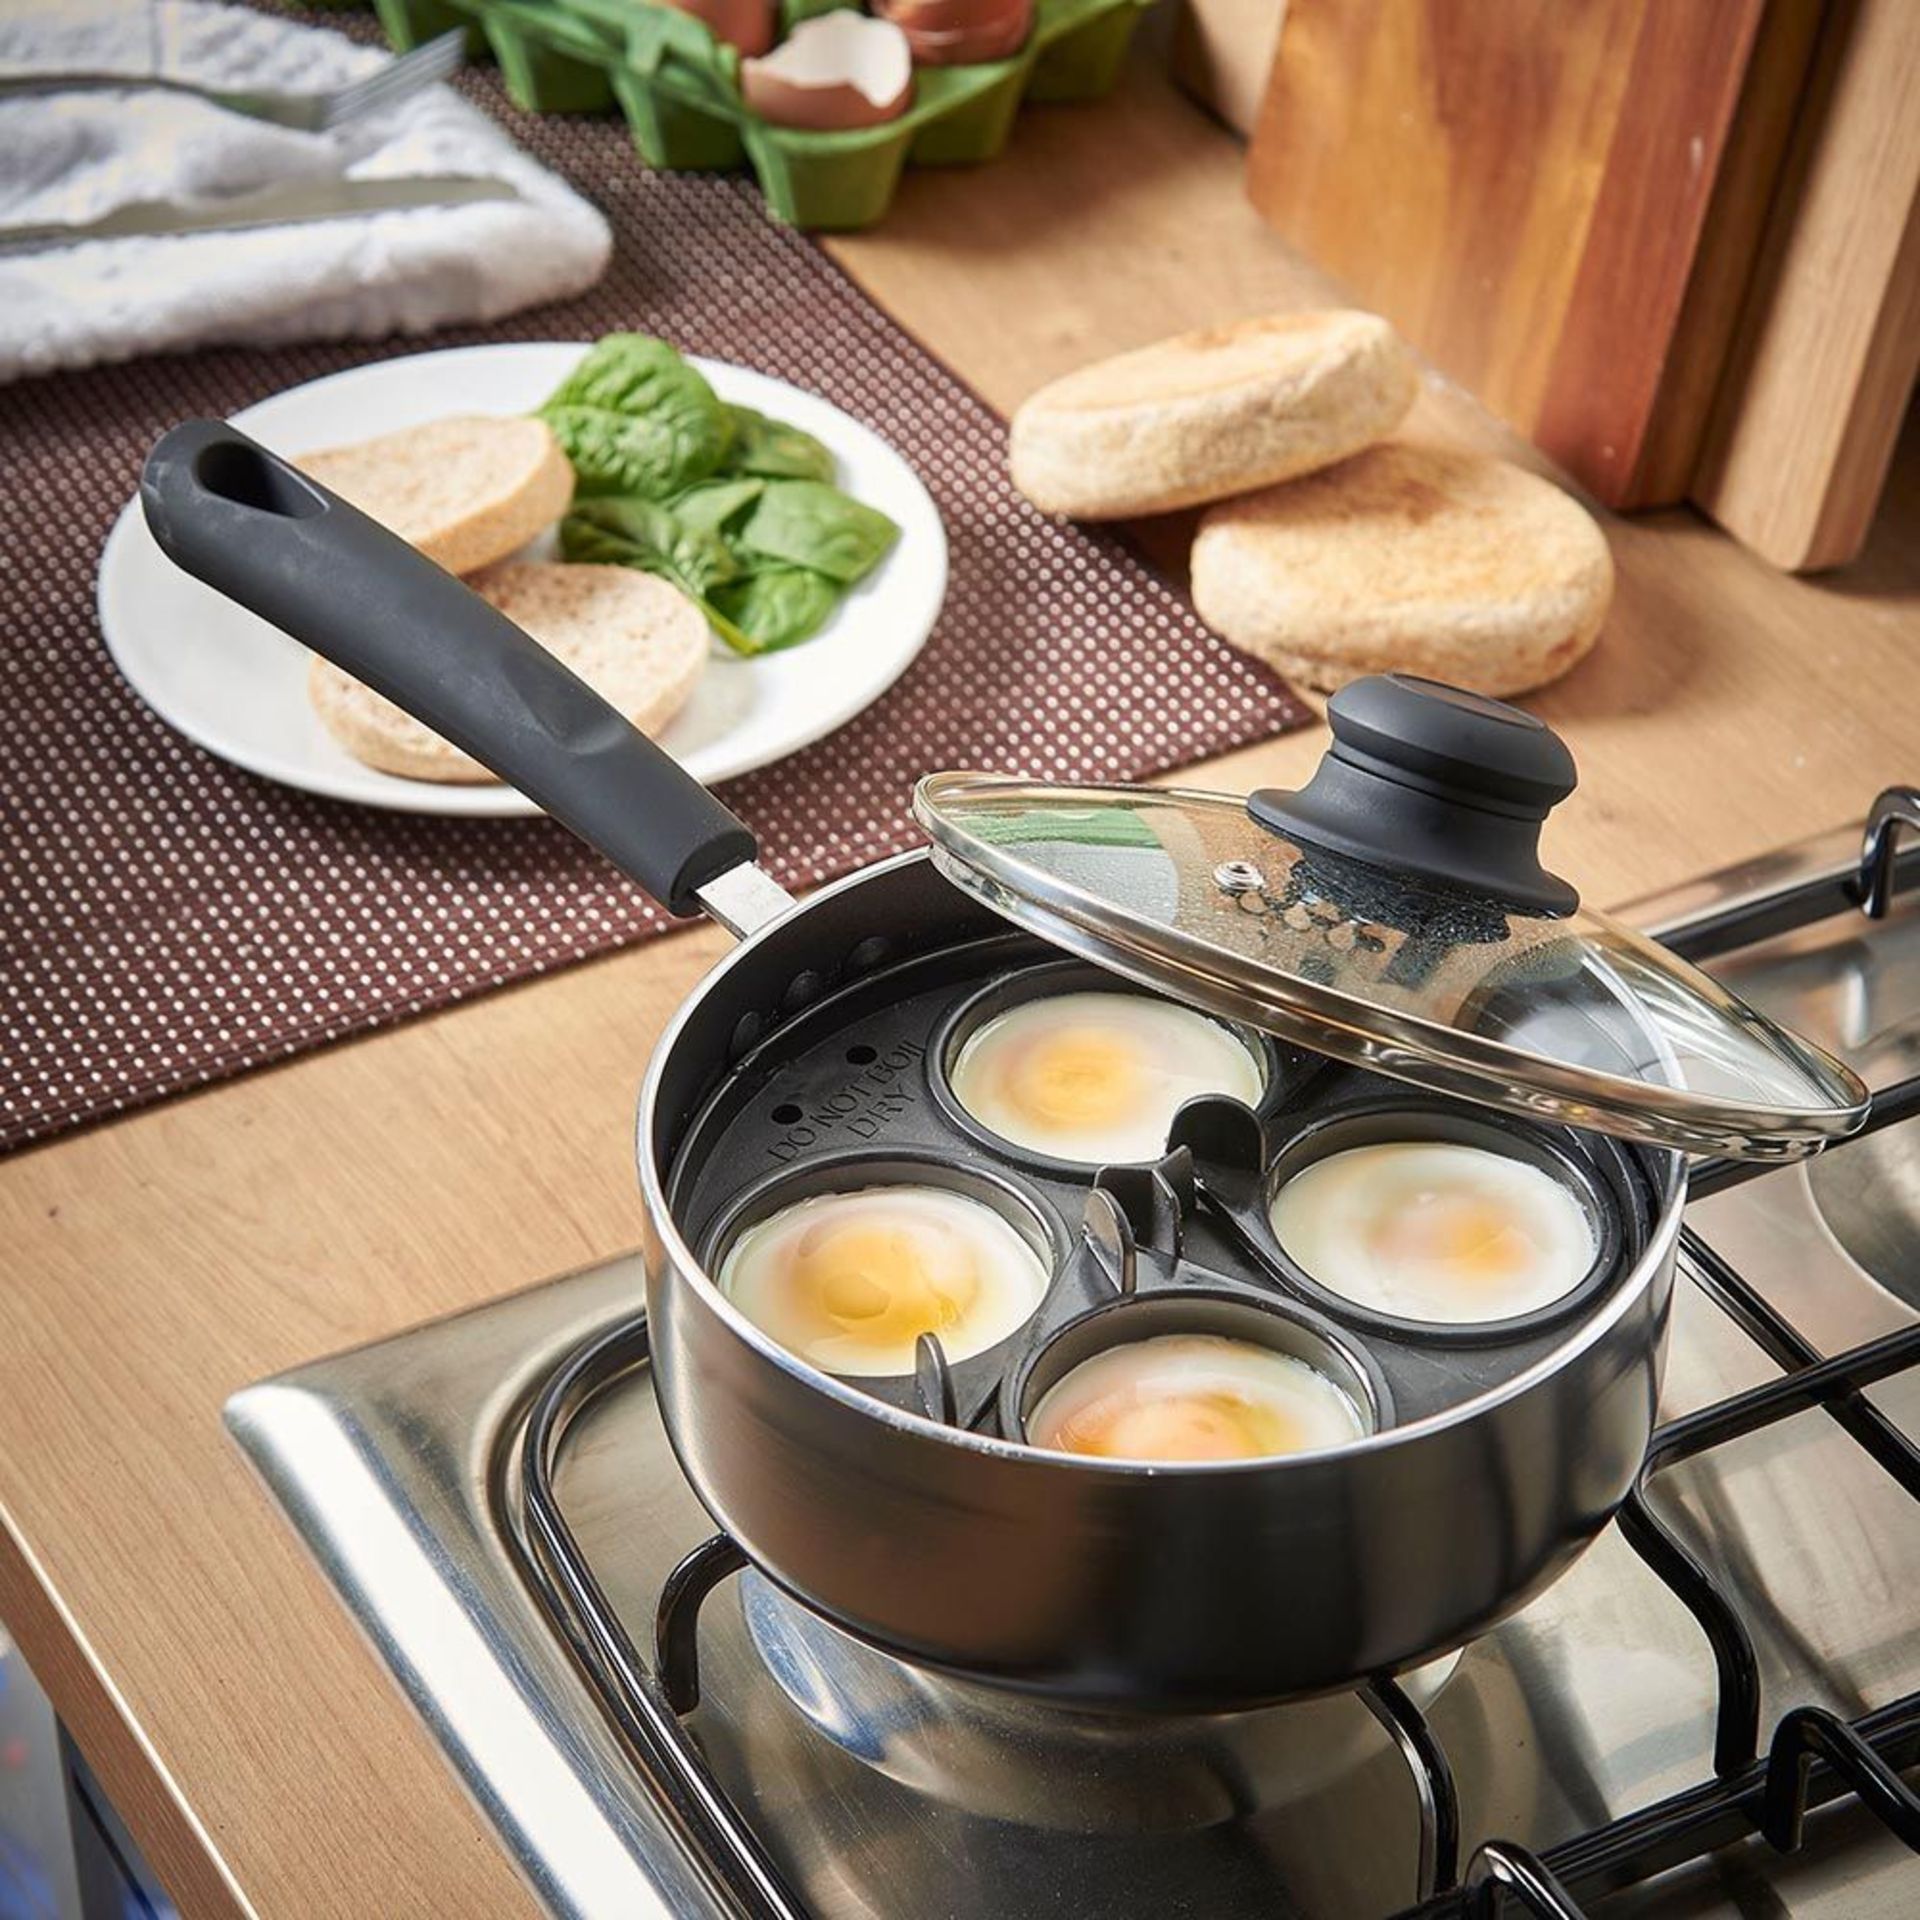 (KG34) Egg Poacher. Includes 4 removable egg cups and internal pan frame to hold them securely ...